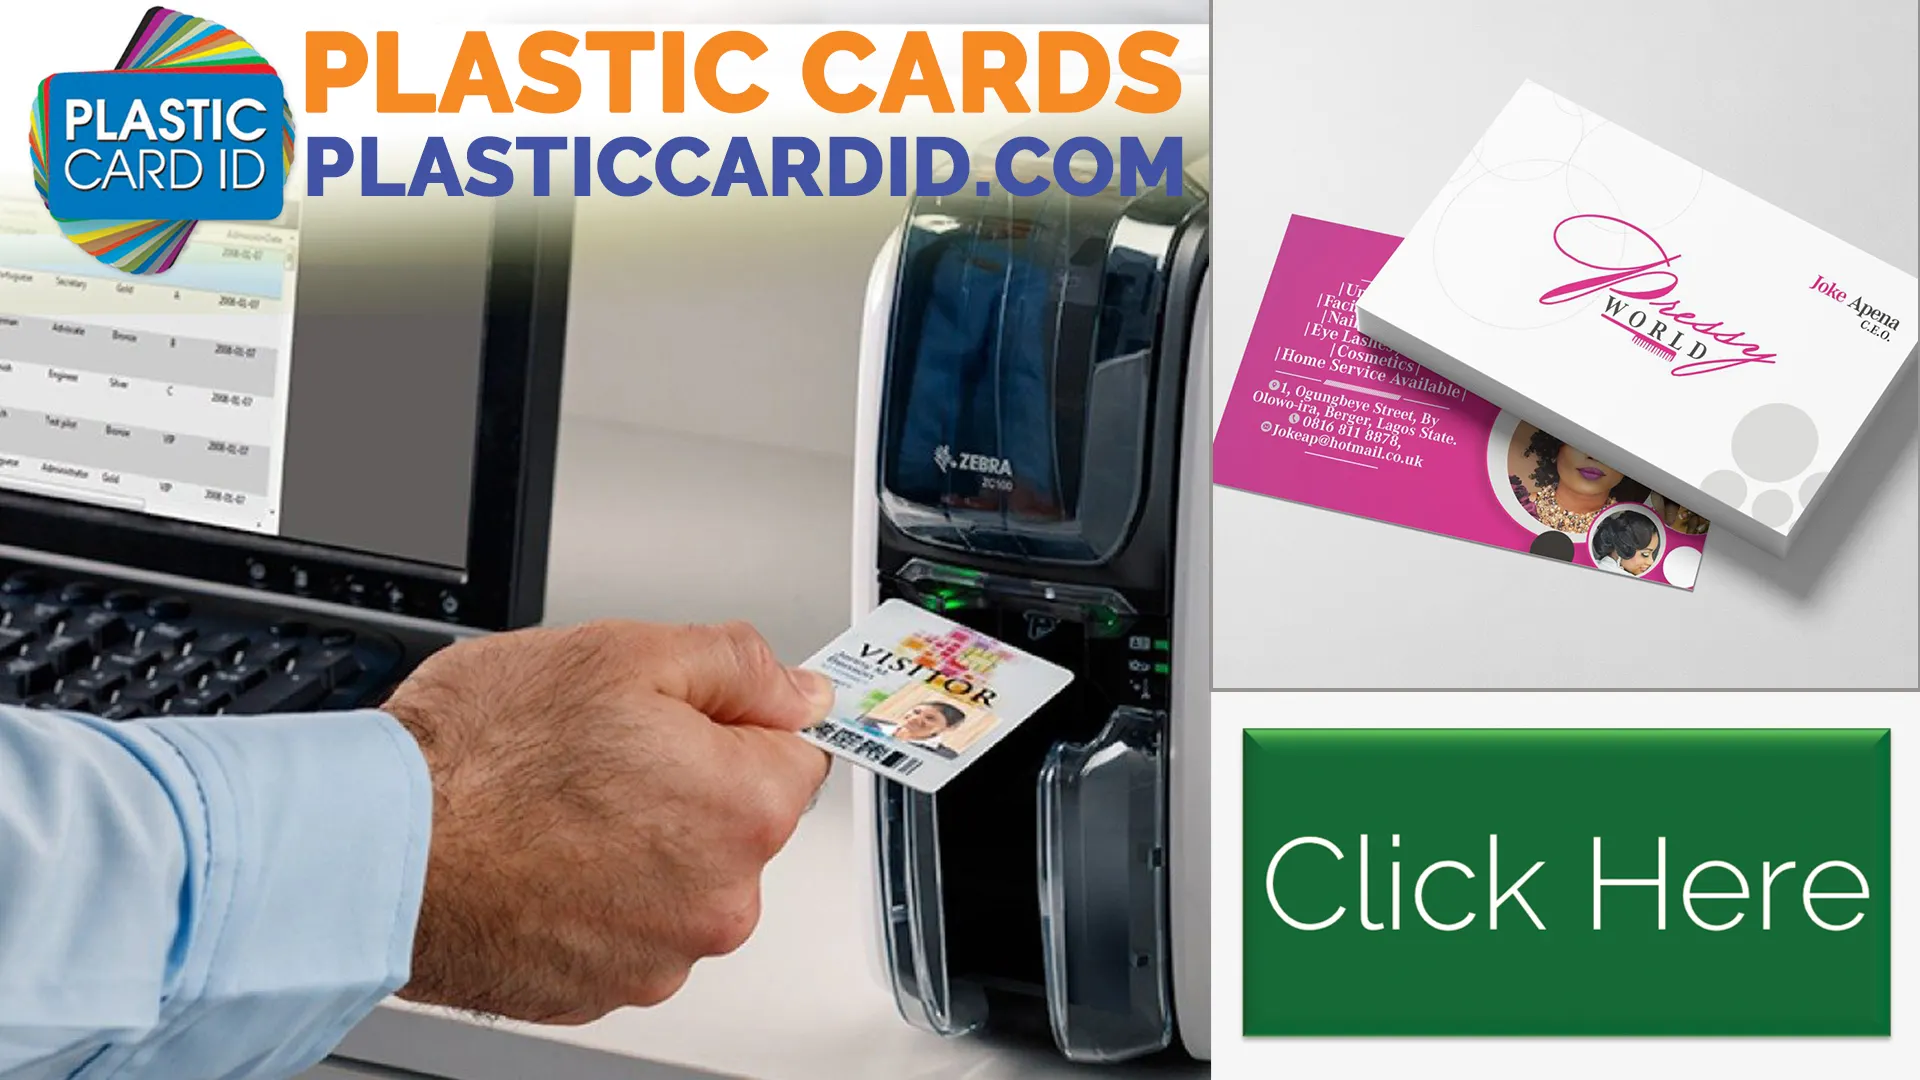 Benefits of Plastic Cards for Your Organization